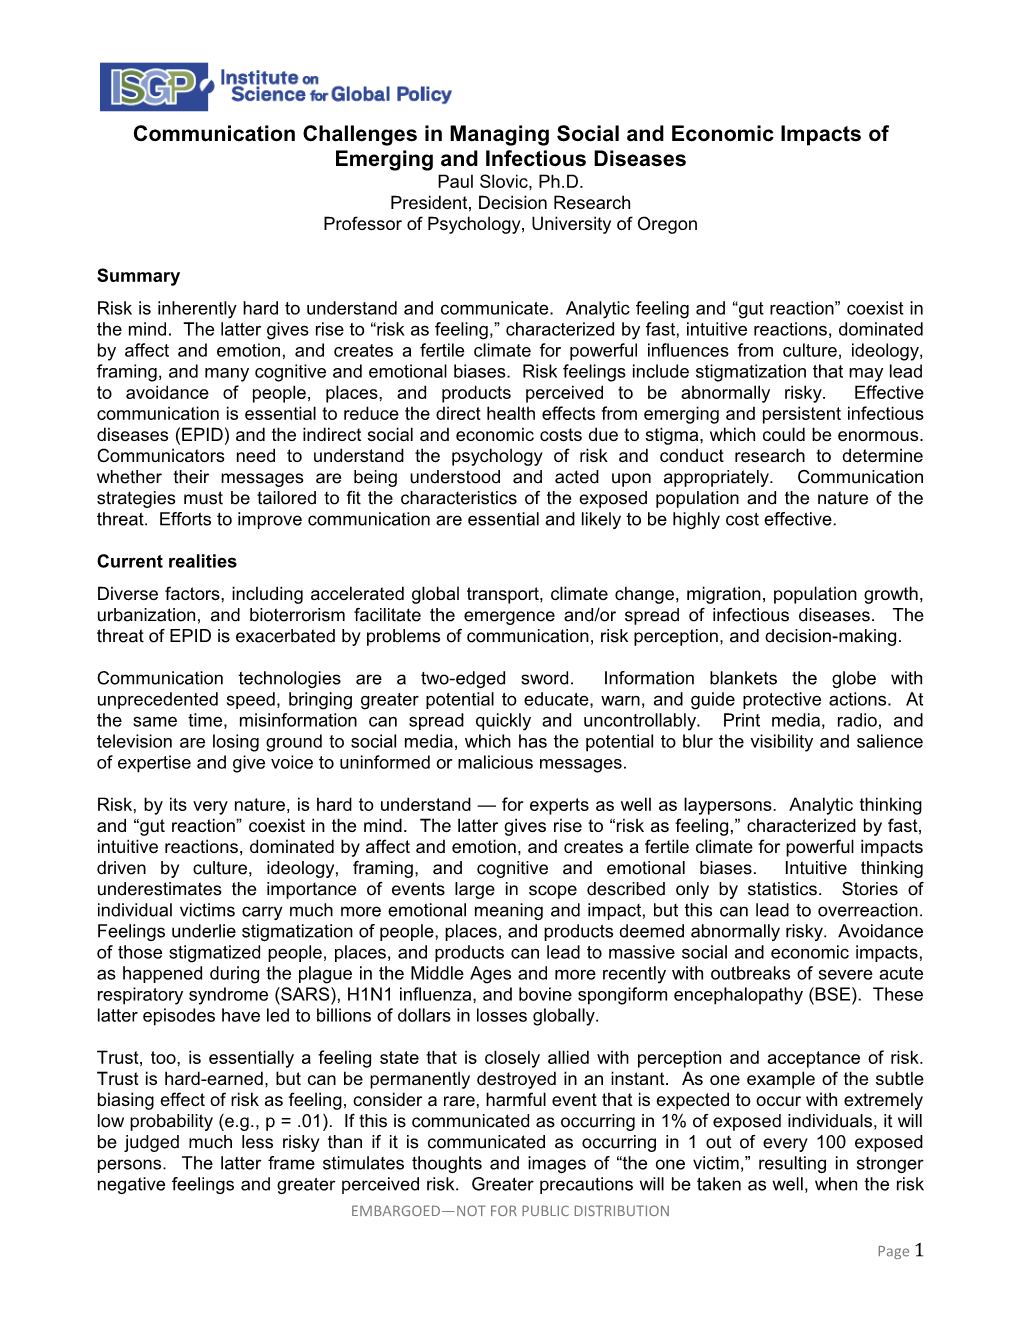 Communication Challenges in Managing Social and Economicimpacts of Emerging and Infectious